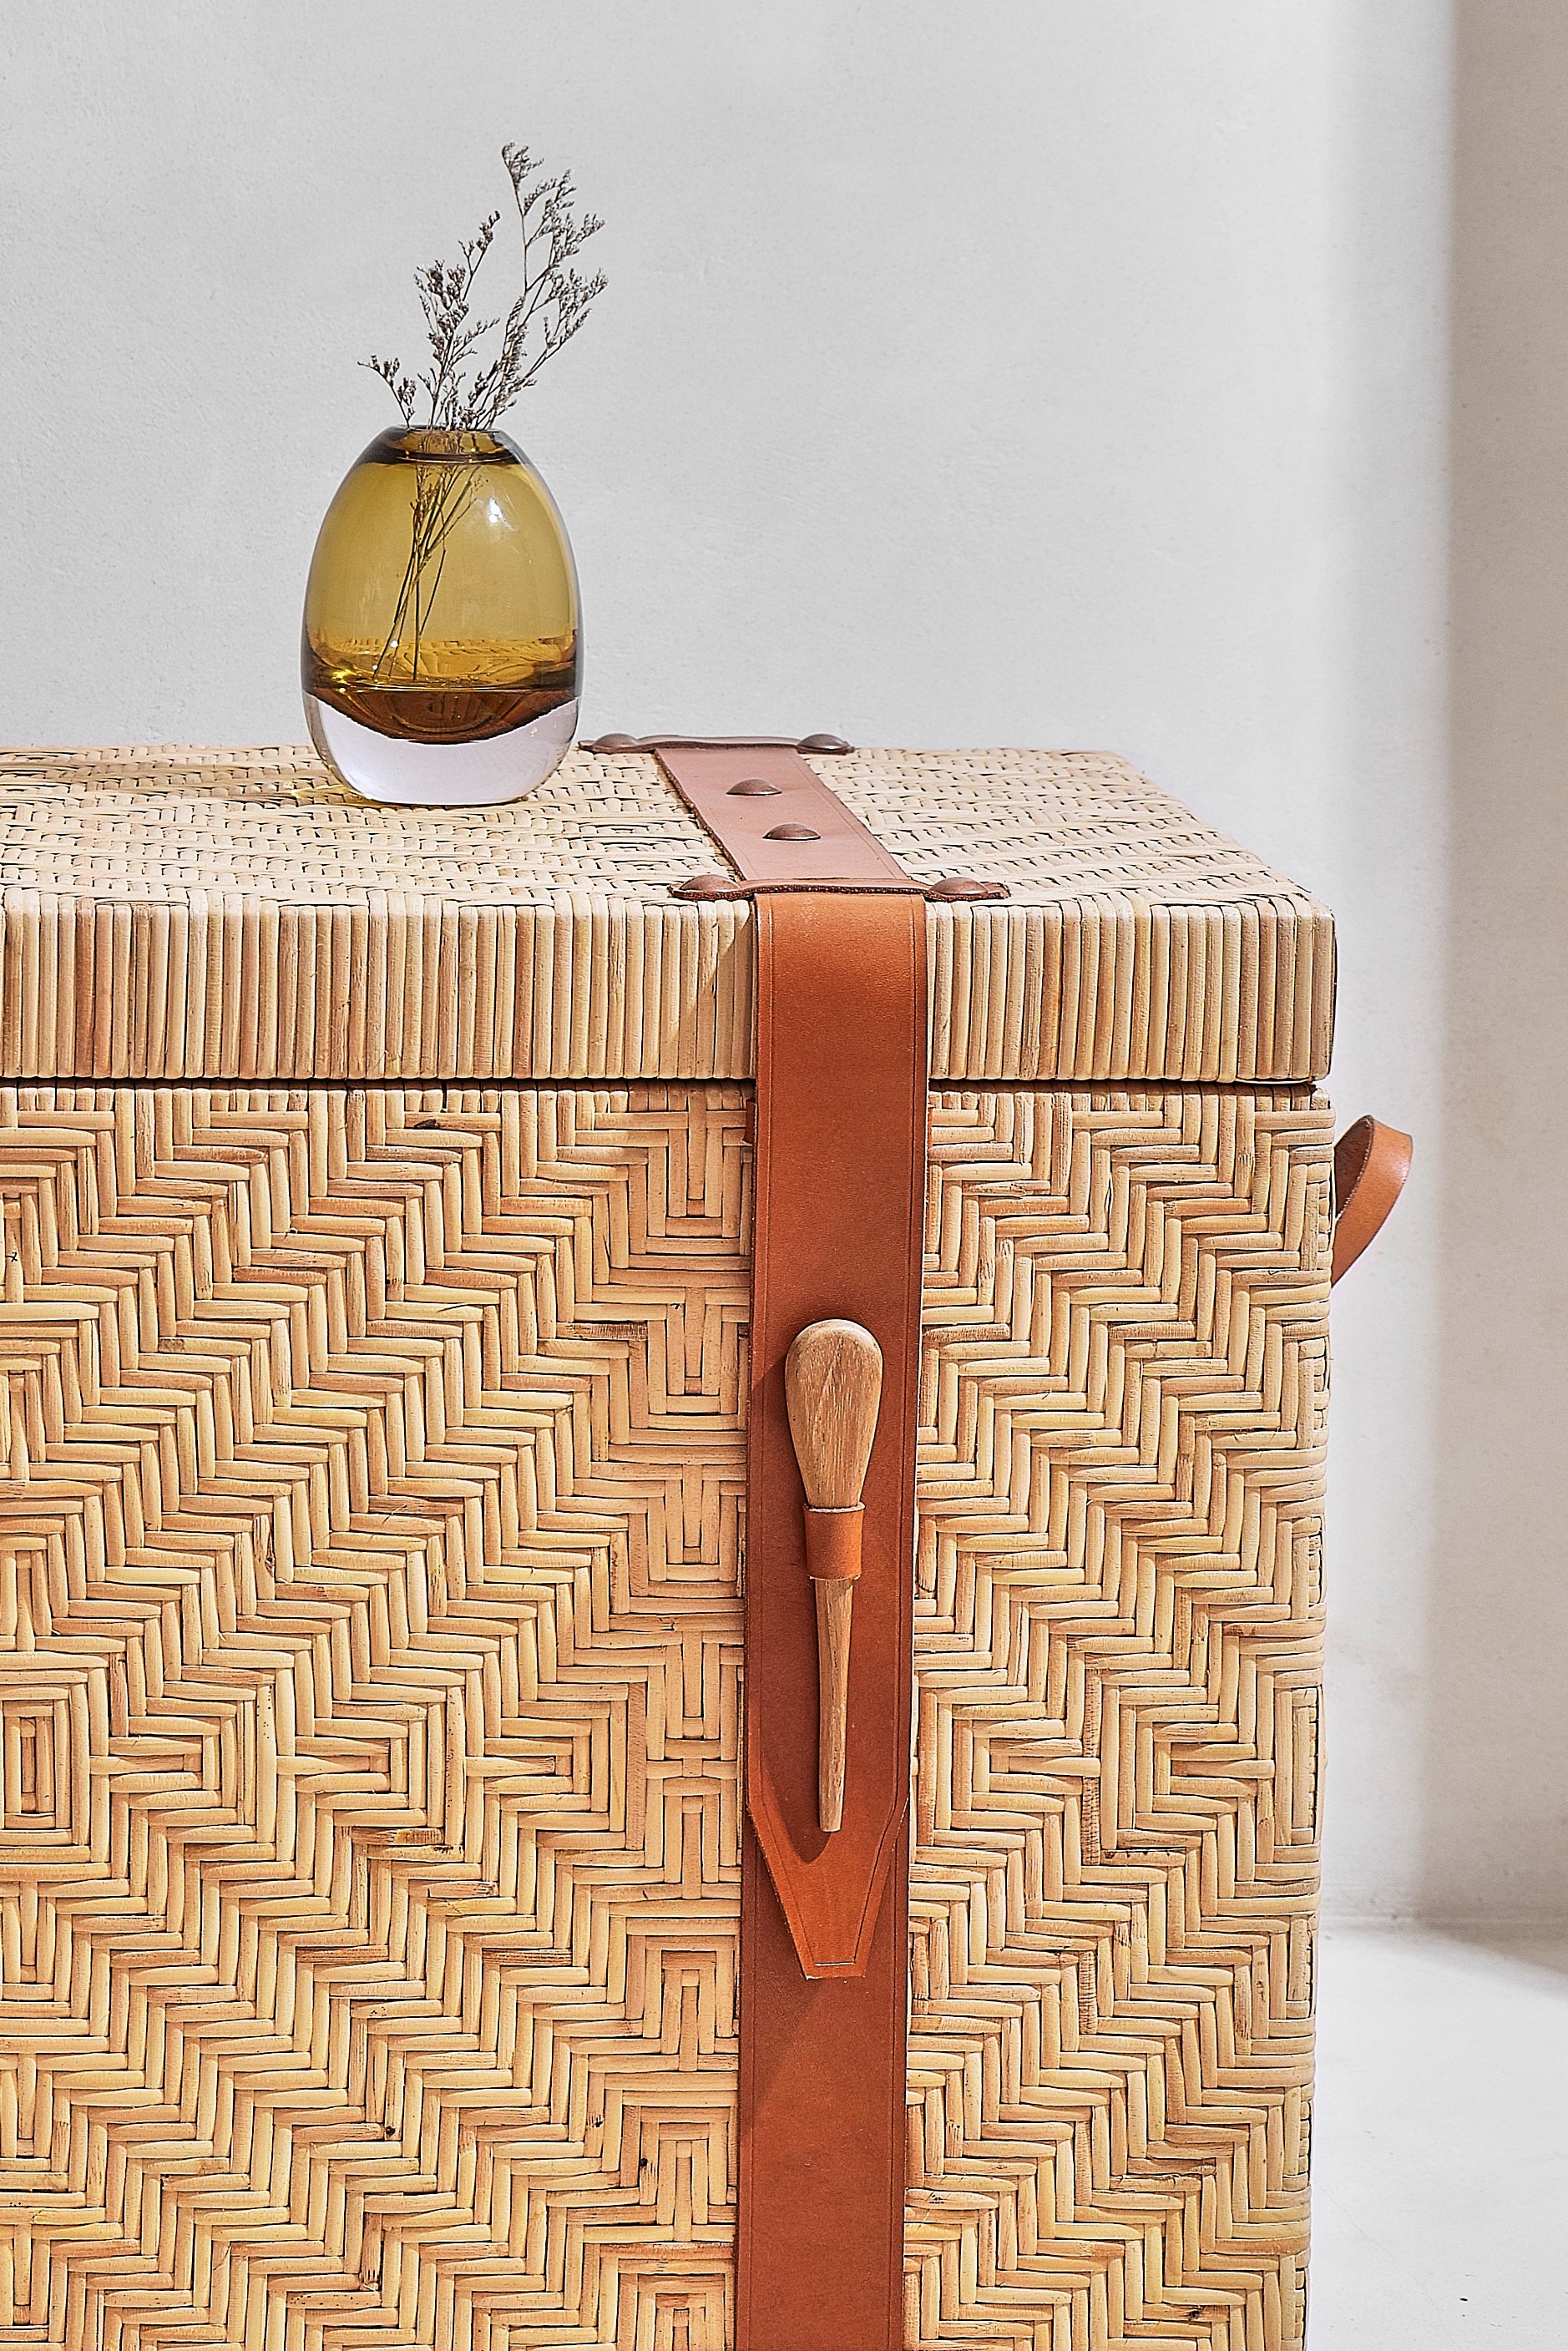 Home Edition 12- Rattan box with camel leather straps troffle